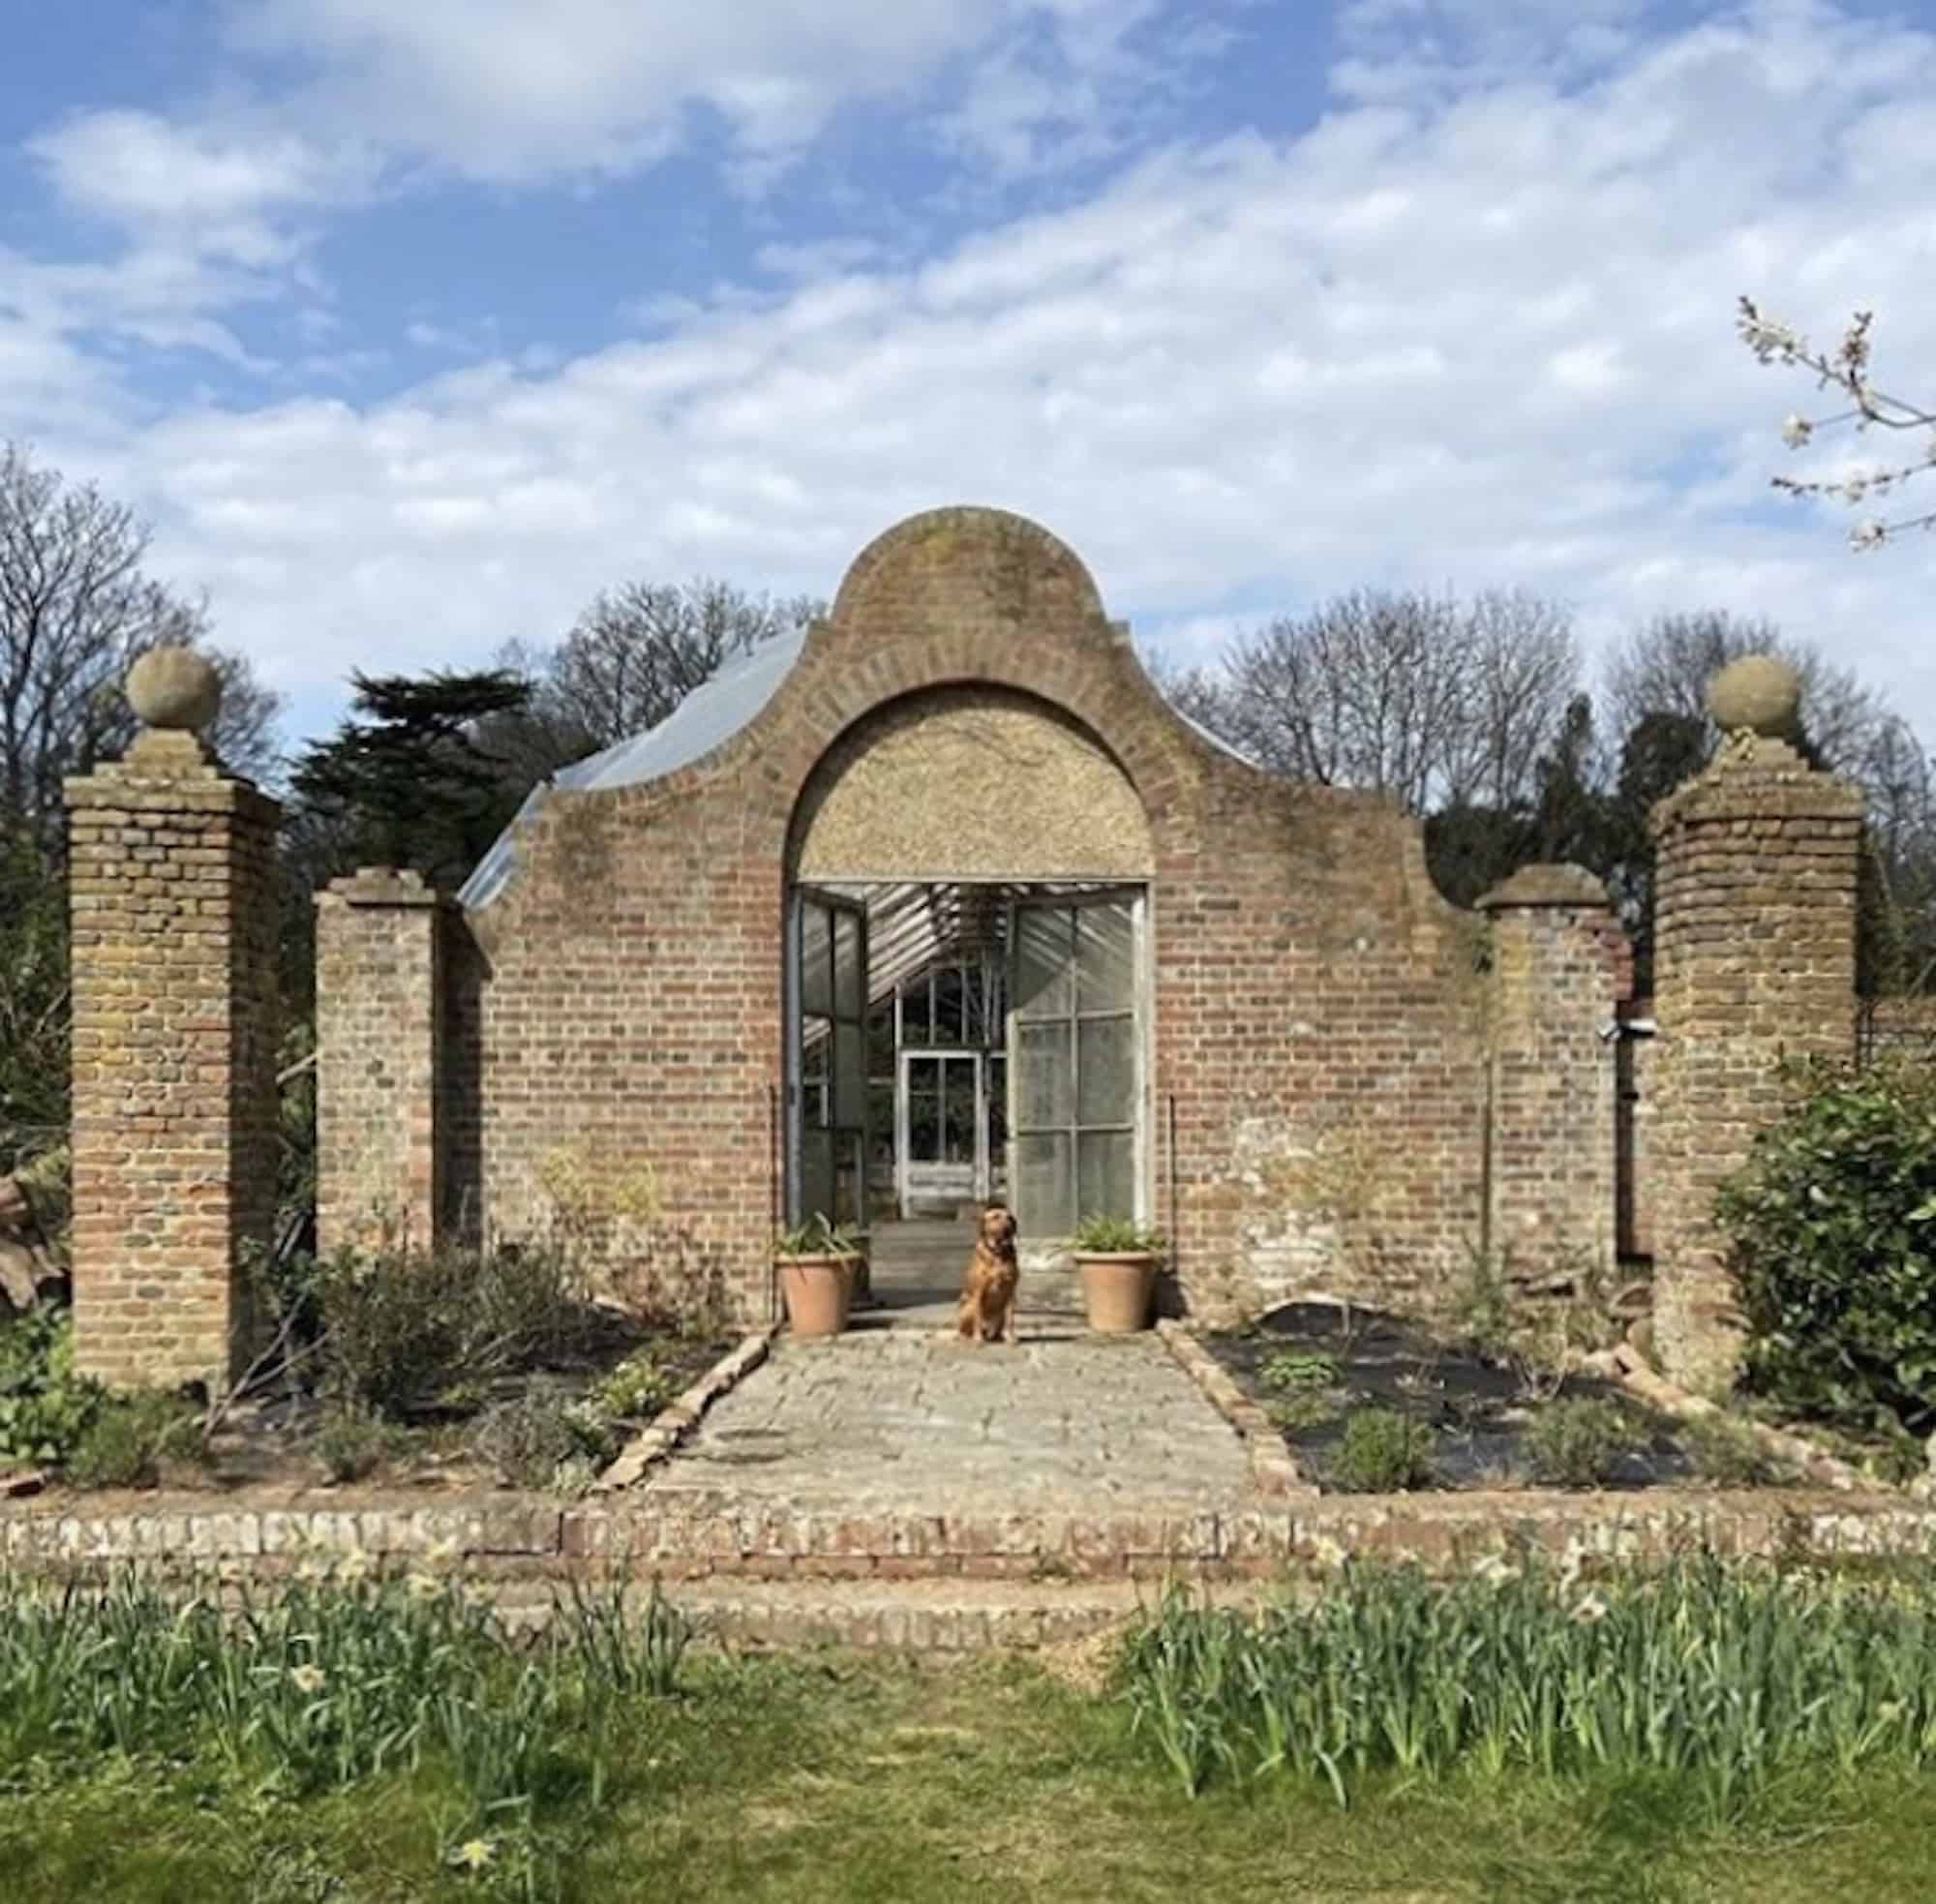 Sissinghurst TN17 - A large farmhouse with beautiful interiors and a derelict Victorian Greenhouse. Available for shoot and stay - The Location Guys